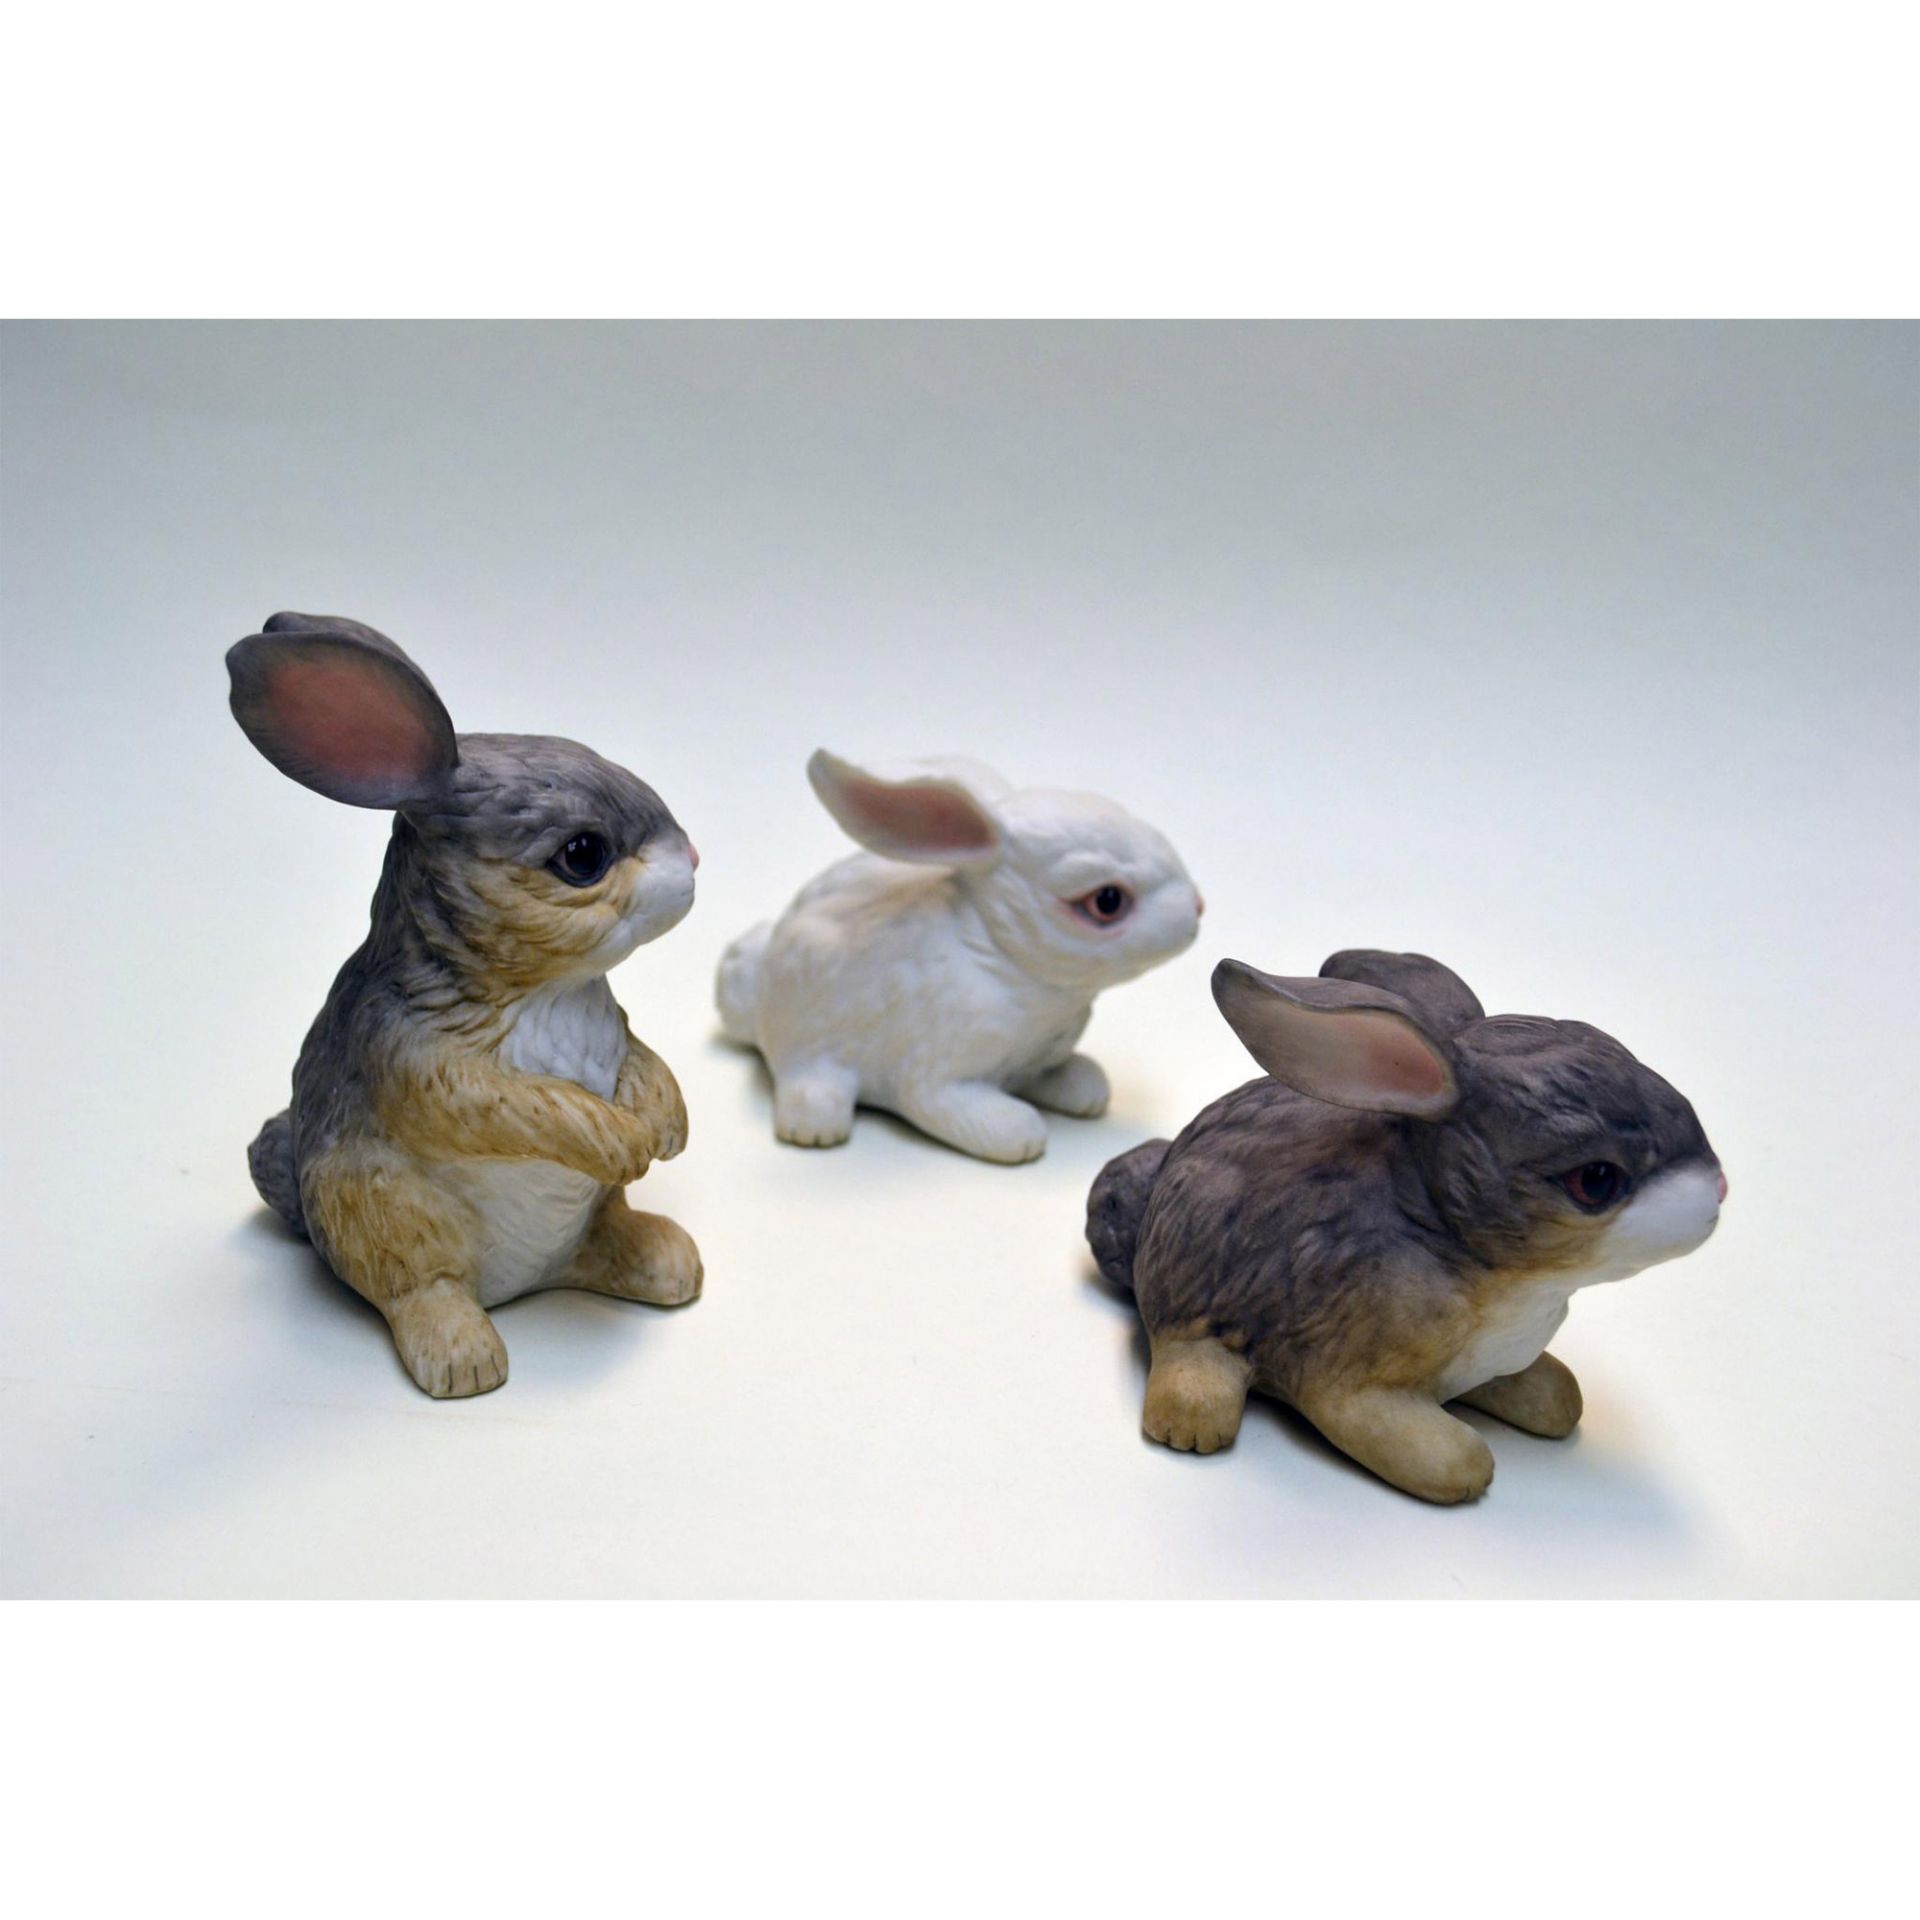 Boehm Porcelain Rabbits, Sitting And At Rest, White & Wild Figurines, 3 Pcs - Image 4 of 6